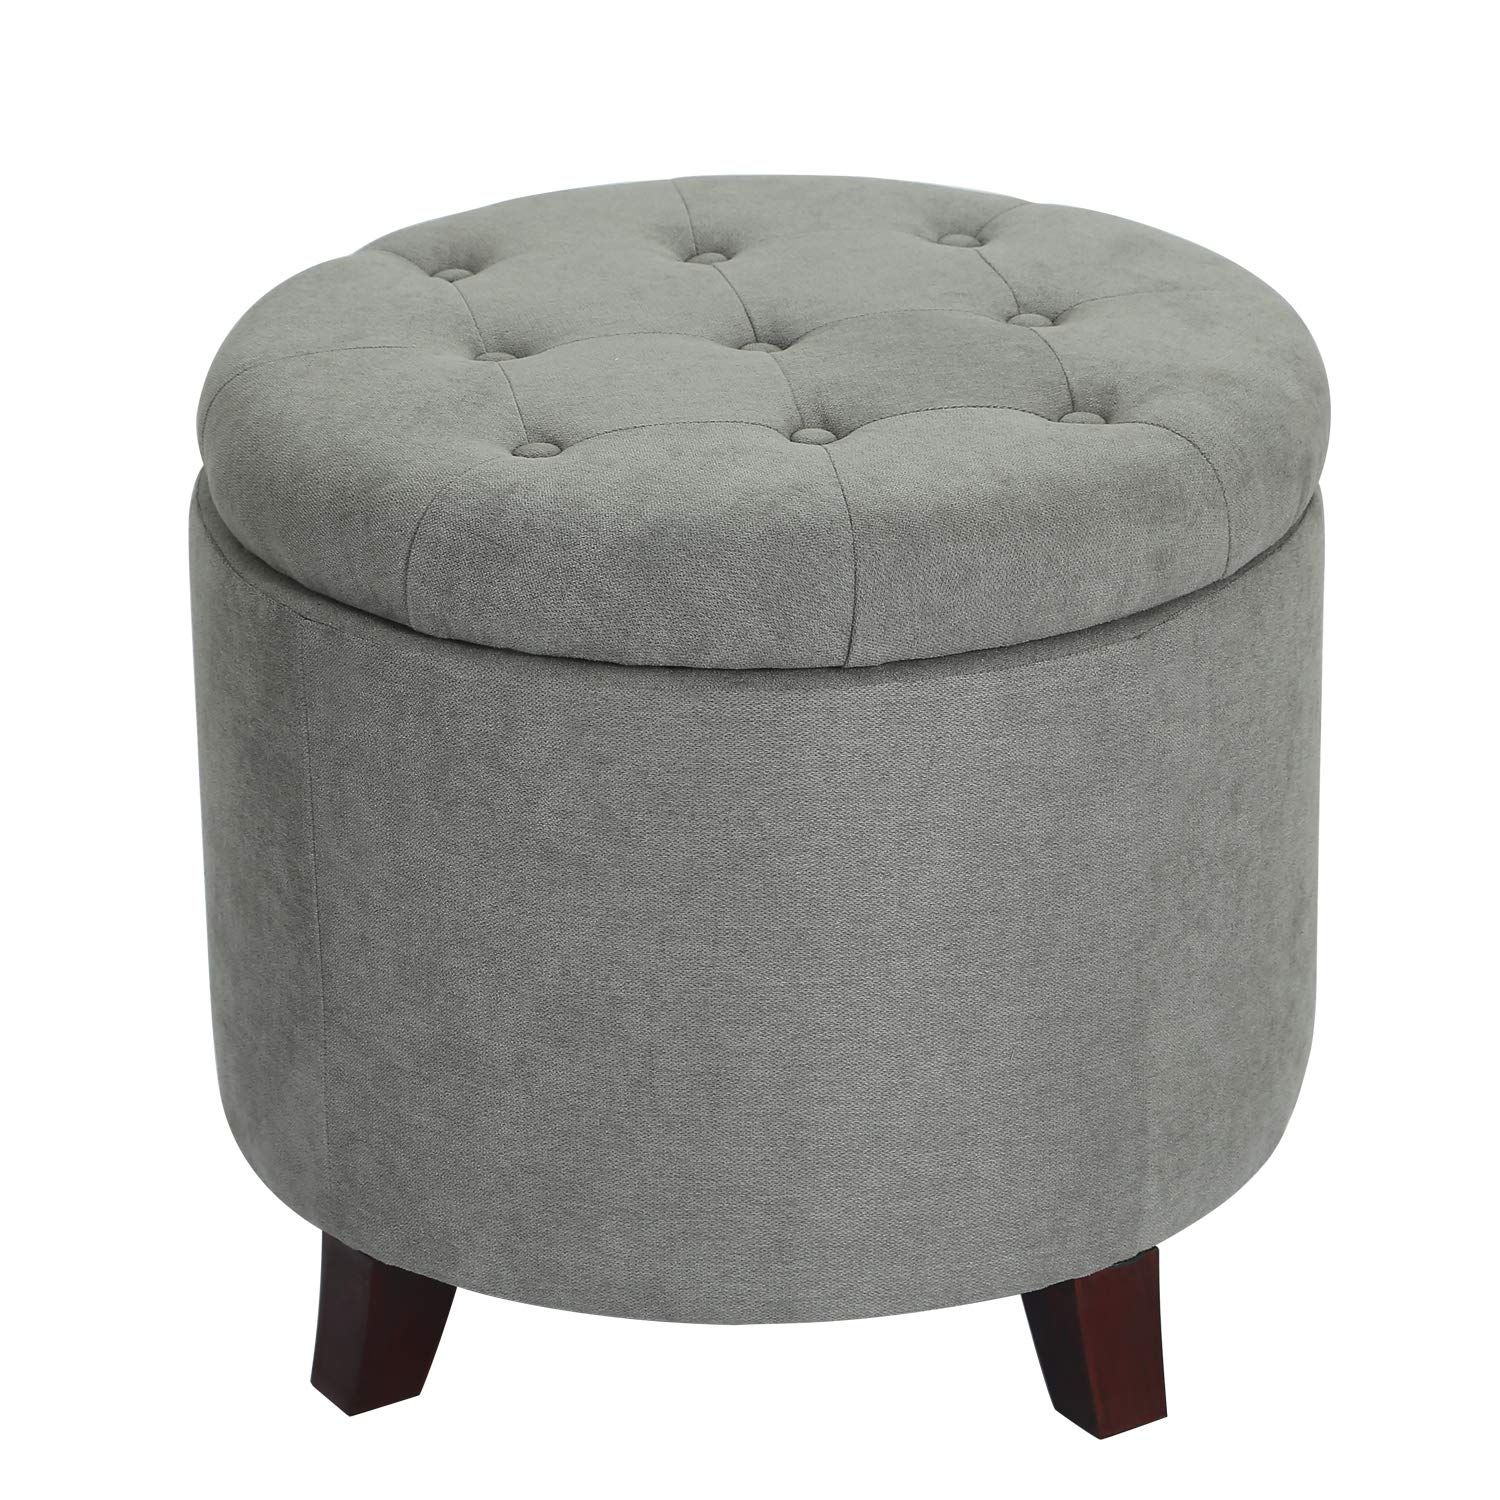 Adeco Fabric Cushion Round Button Tufted Lift Top Storage Ottoman Inside Cream Fabric Tufted Oval Ottomans (View 10 of 20)